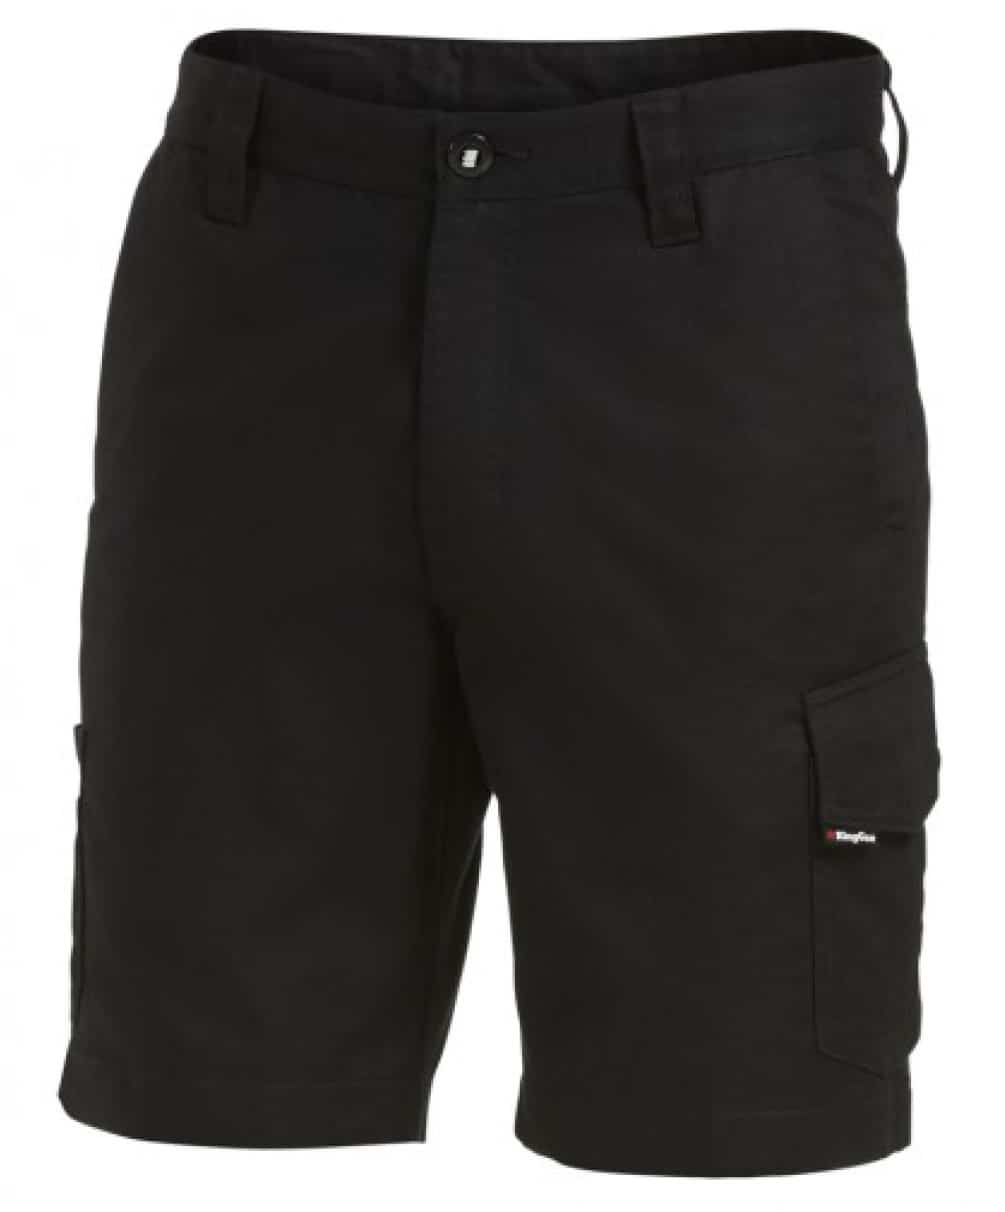 WORKCOOL 2 SHORTS - Top Quality Work Wear